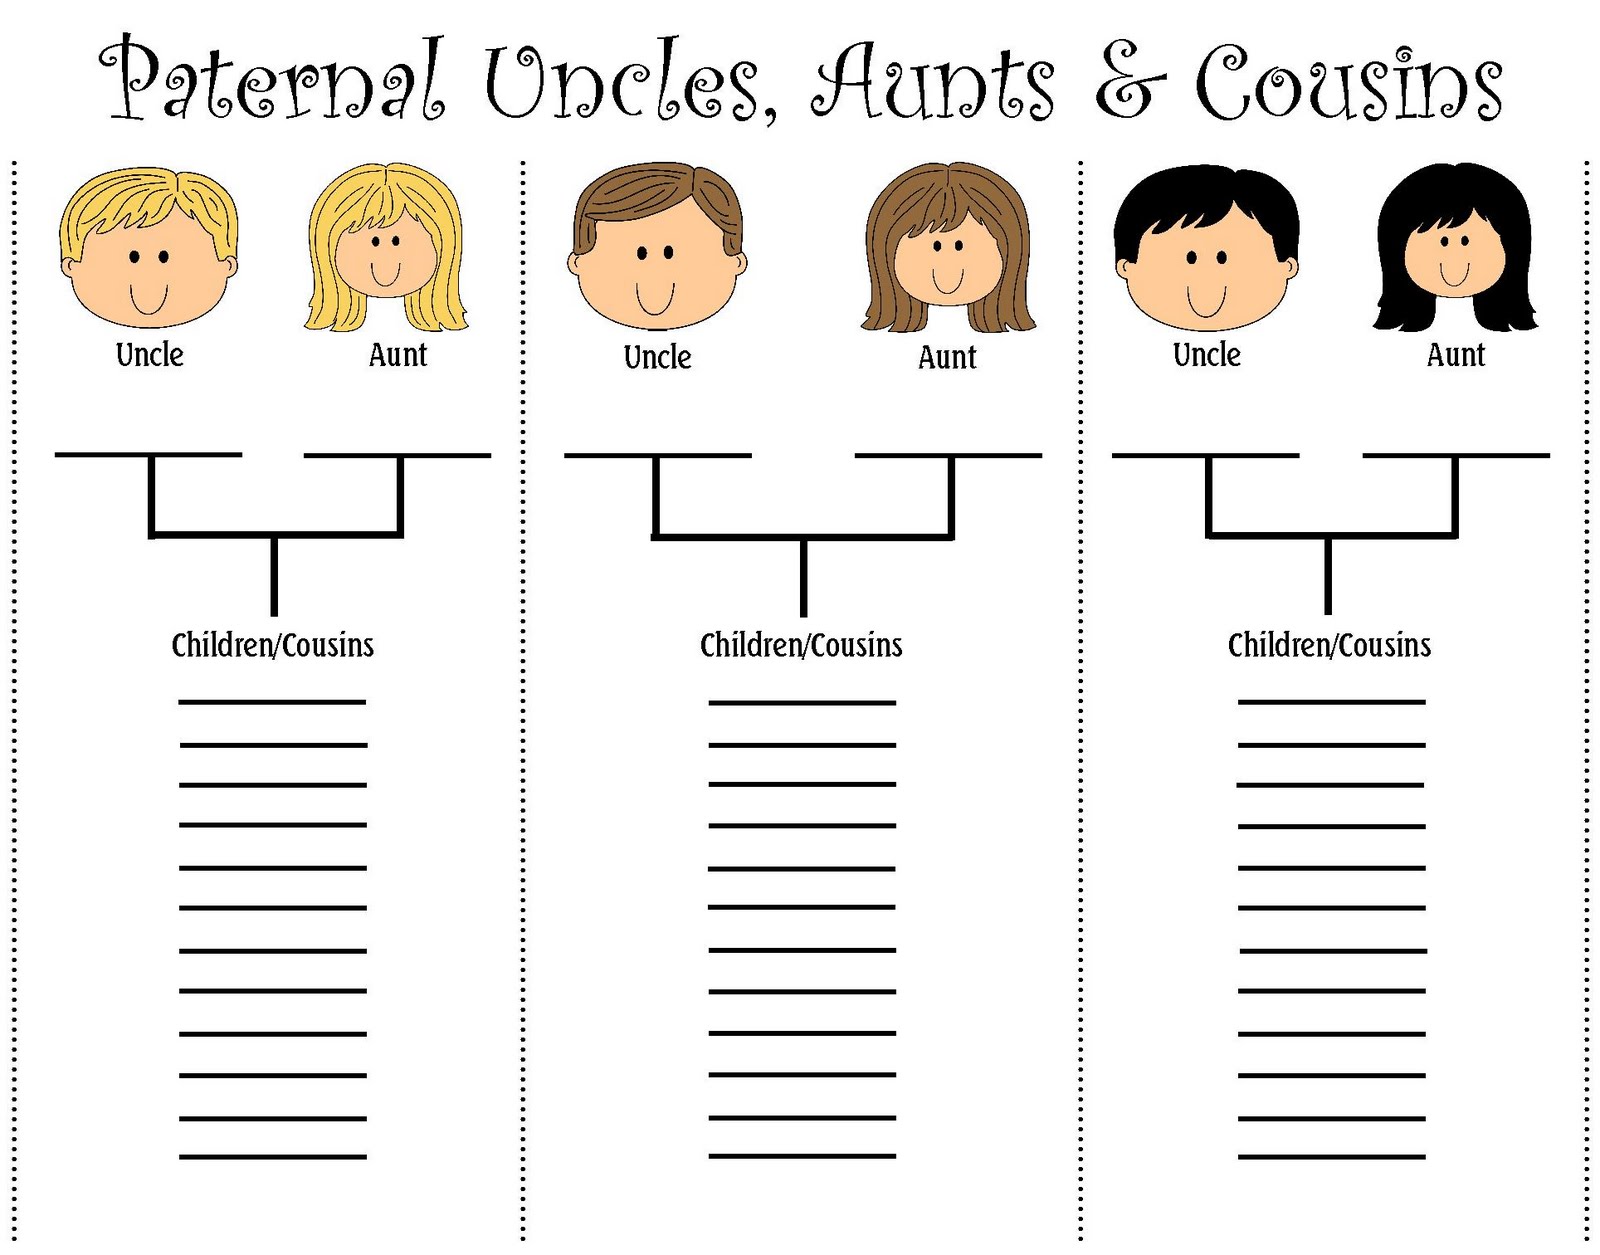 family-tree-template-with-siblings-aunts-uncles-cousins-database